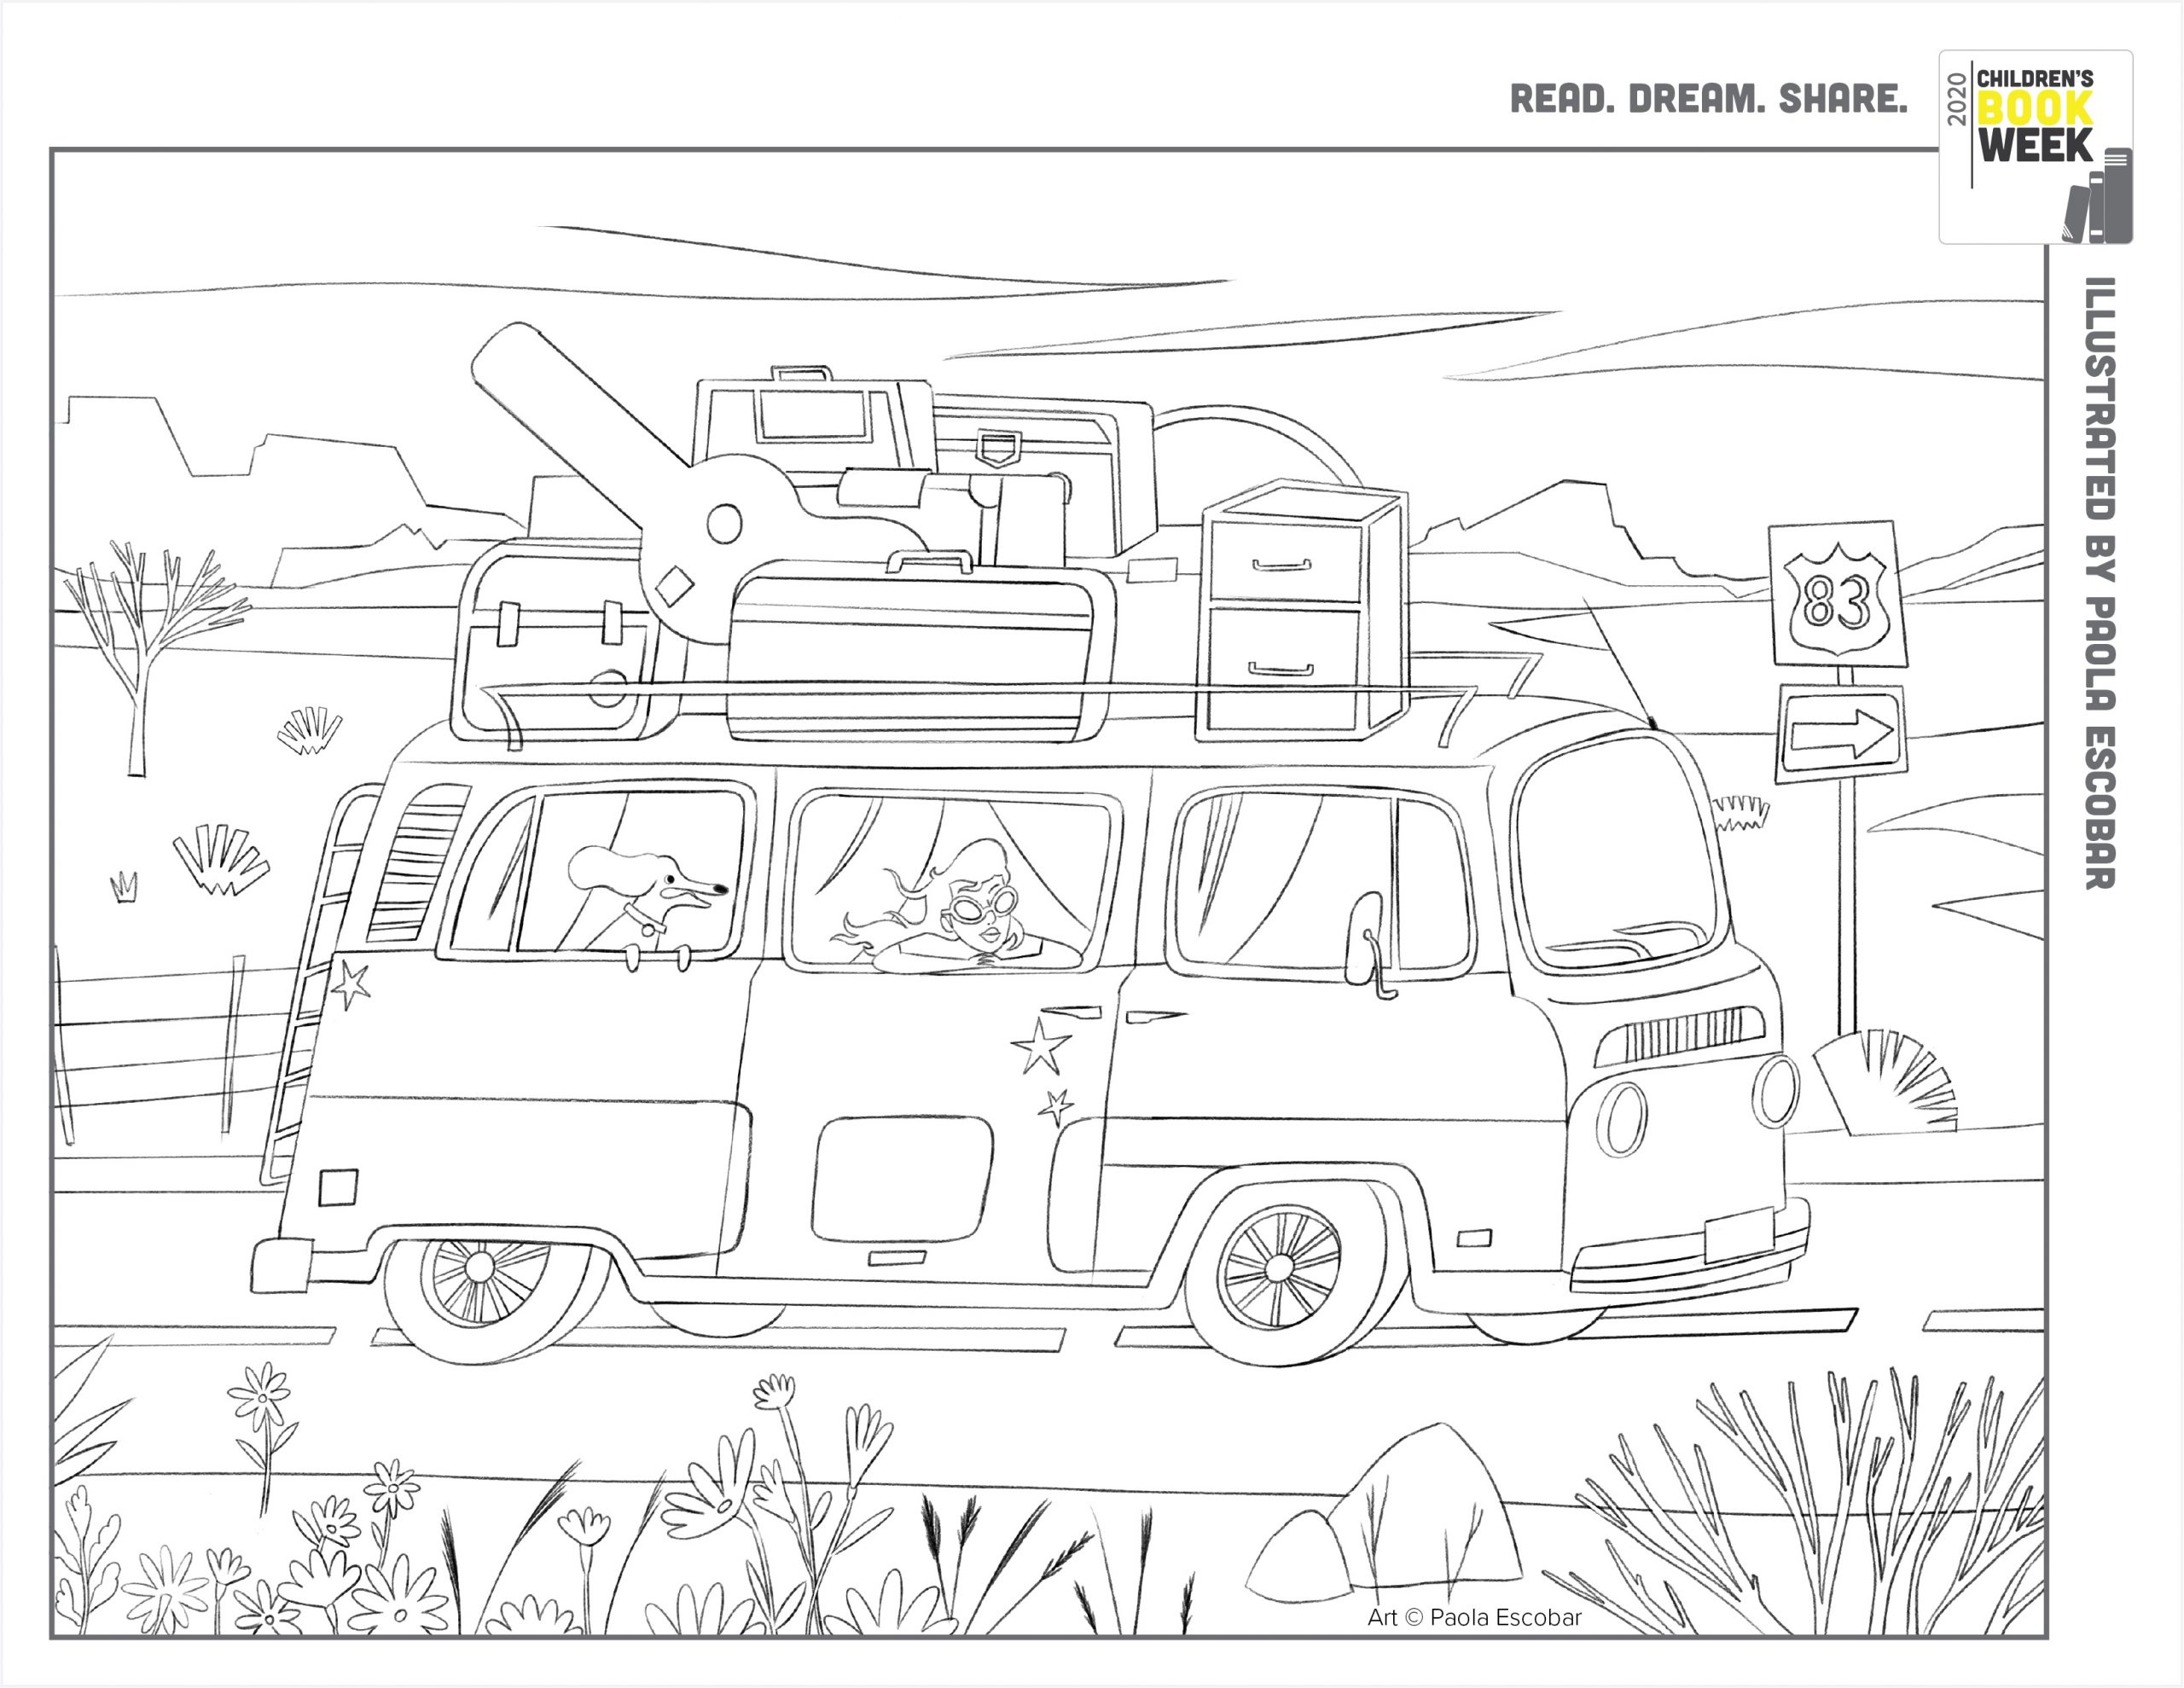 Coloring book pages â every child a reader